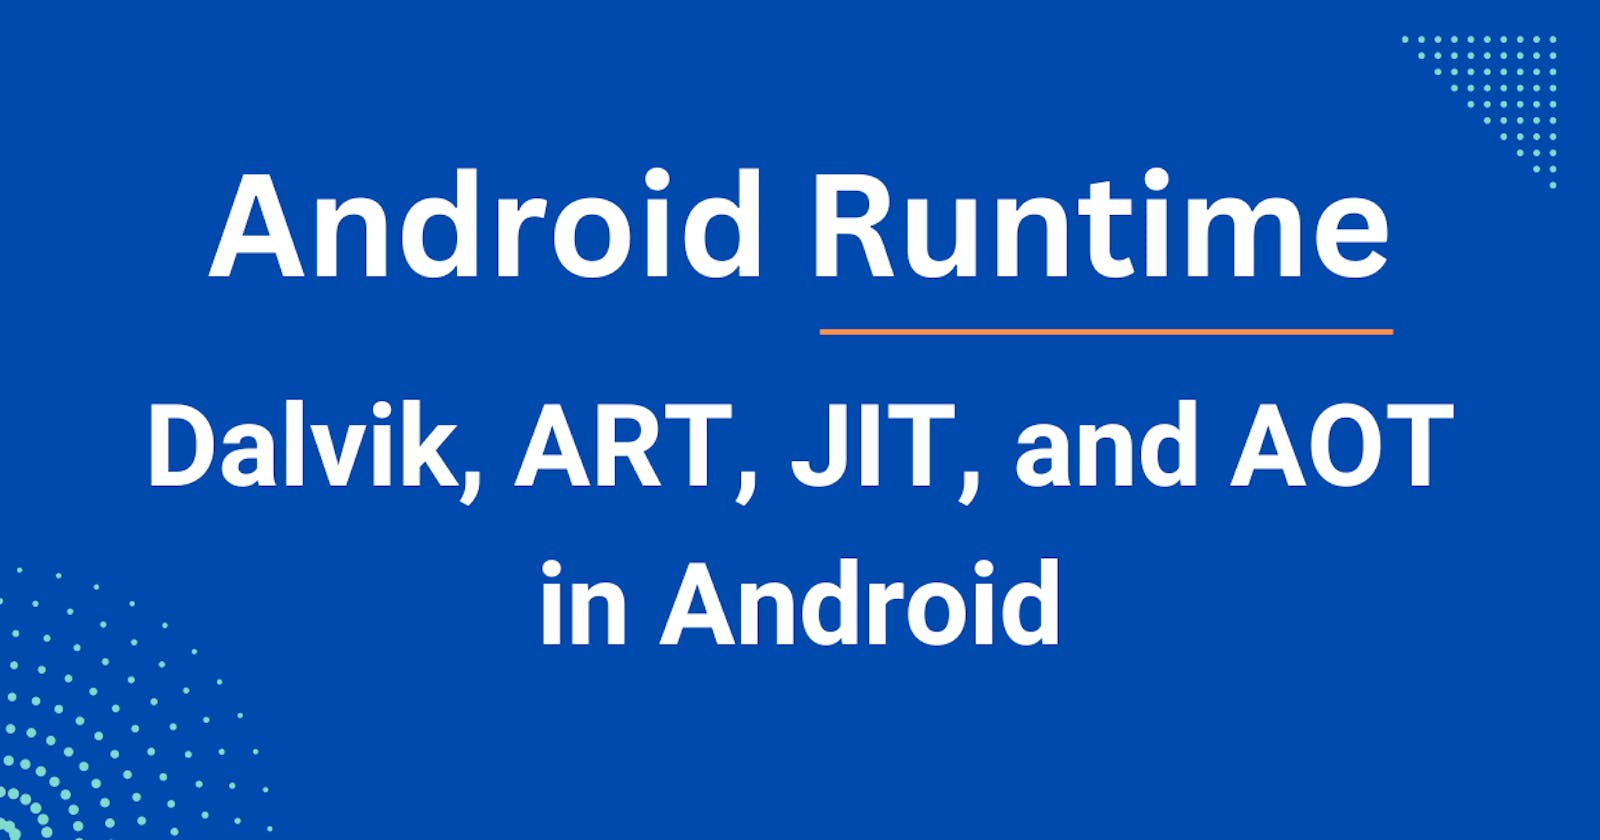 Dalvik, ART, JIT, and AOT in Android